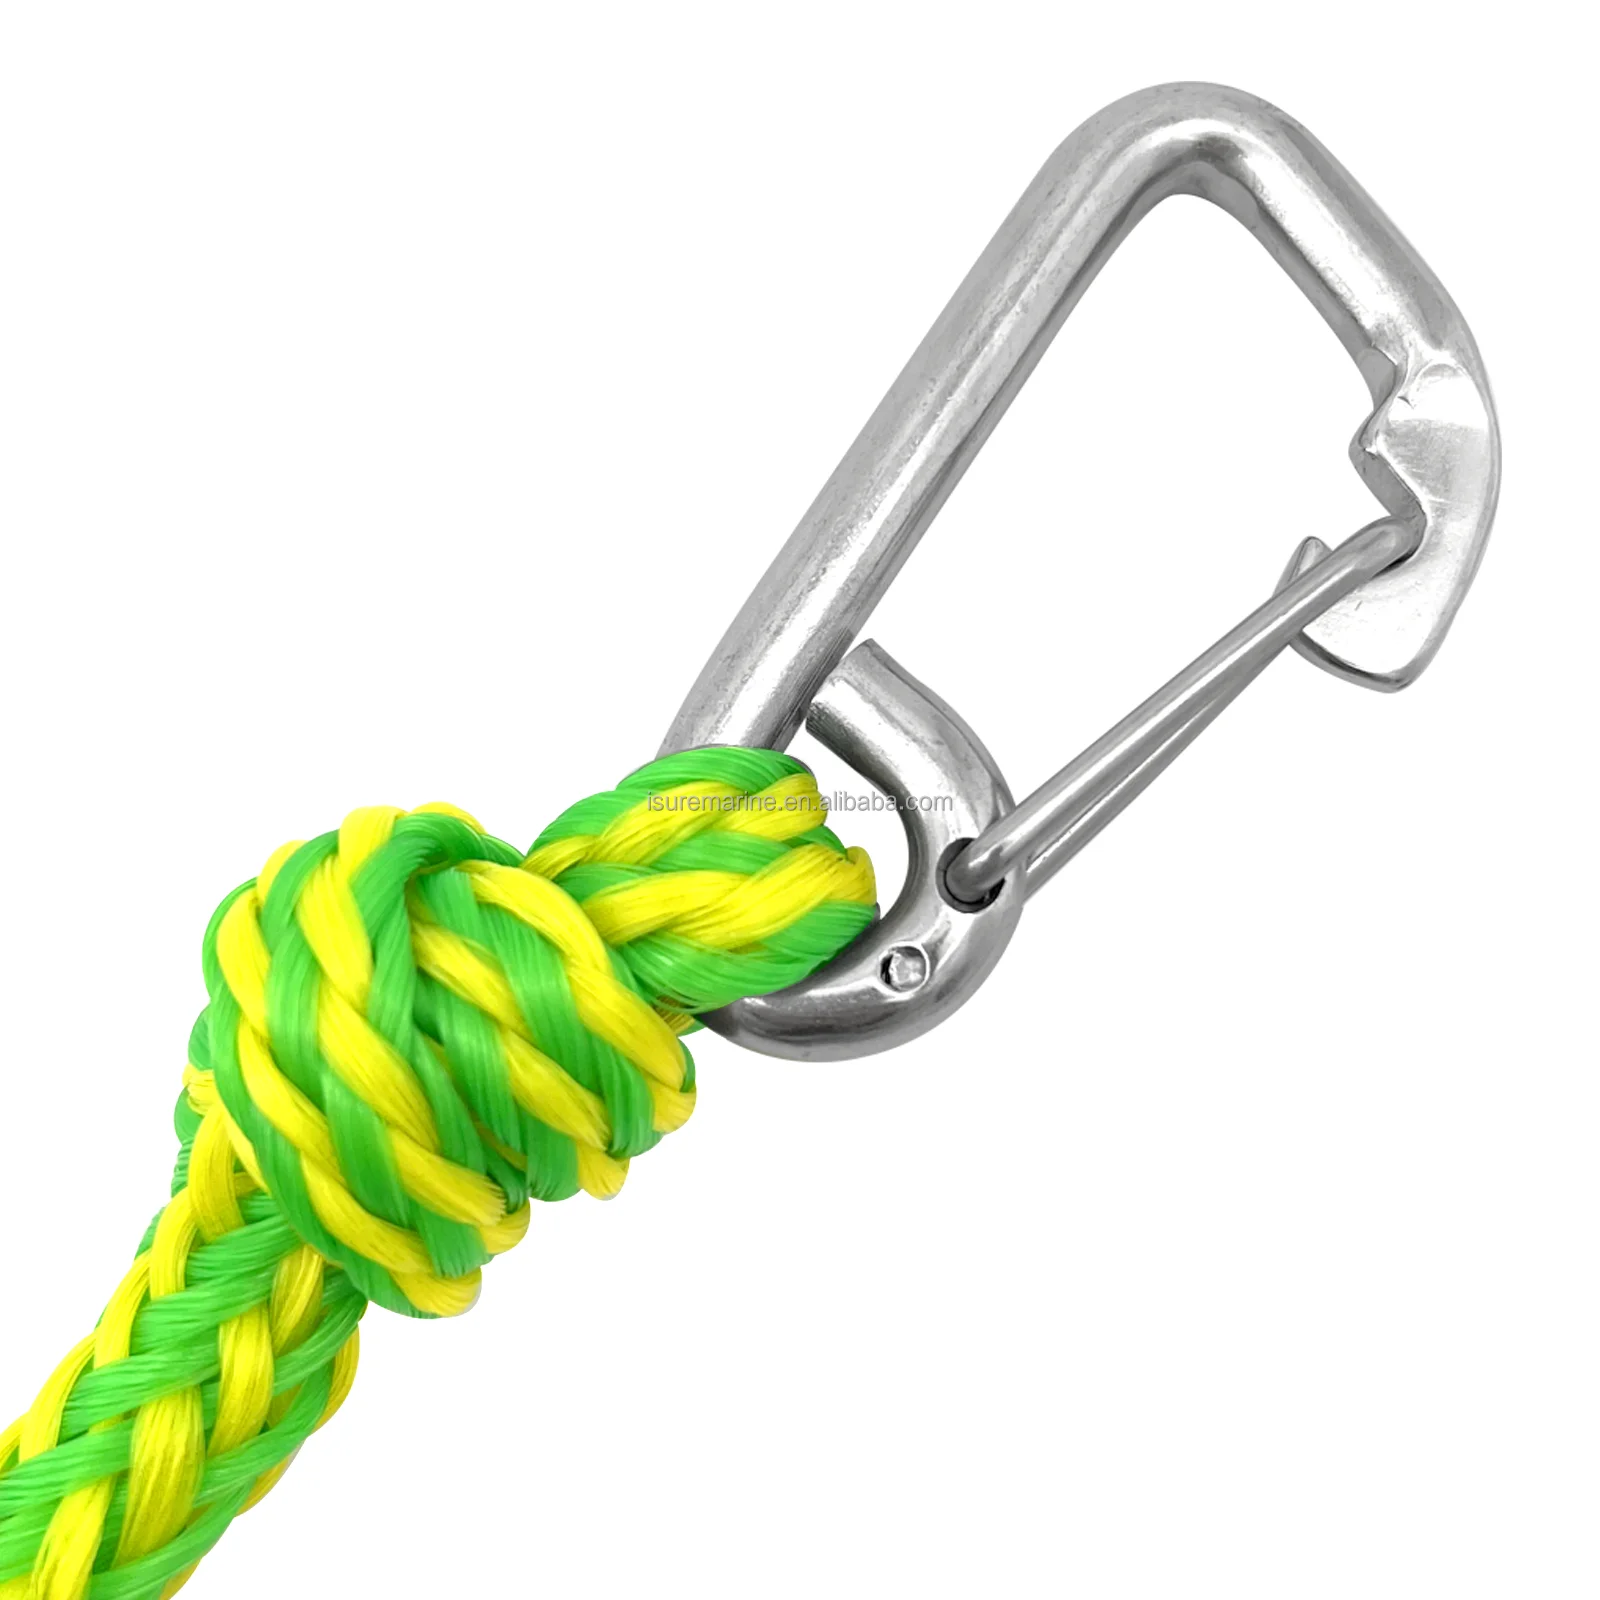 Kayak Tow Rope with Clip, Heavy